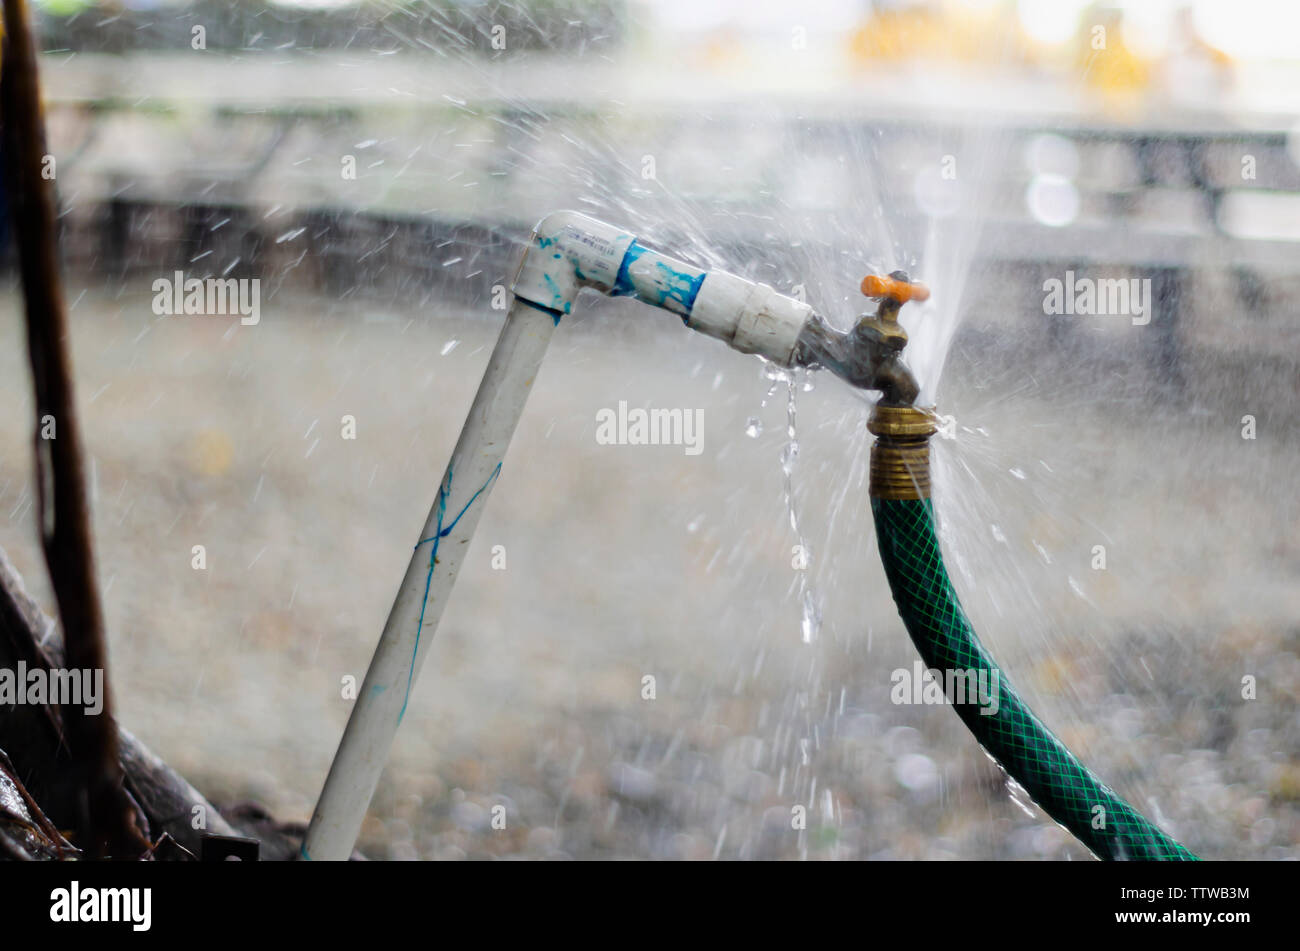 Leaking Pipe Wasting Water High Resolution Stock Photography And Images Alamy Water is one of the most precious natural resource upon which all lives are dependent upon. alamy